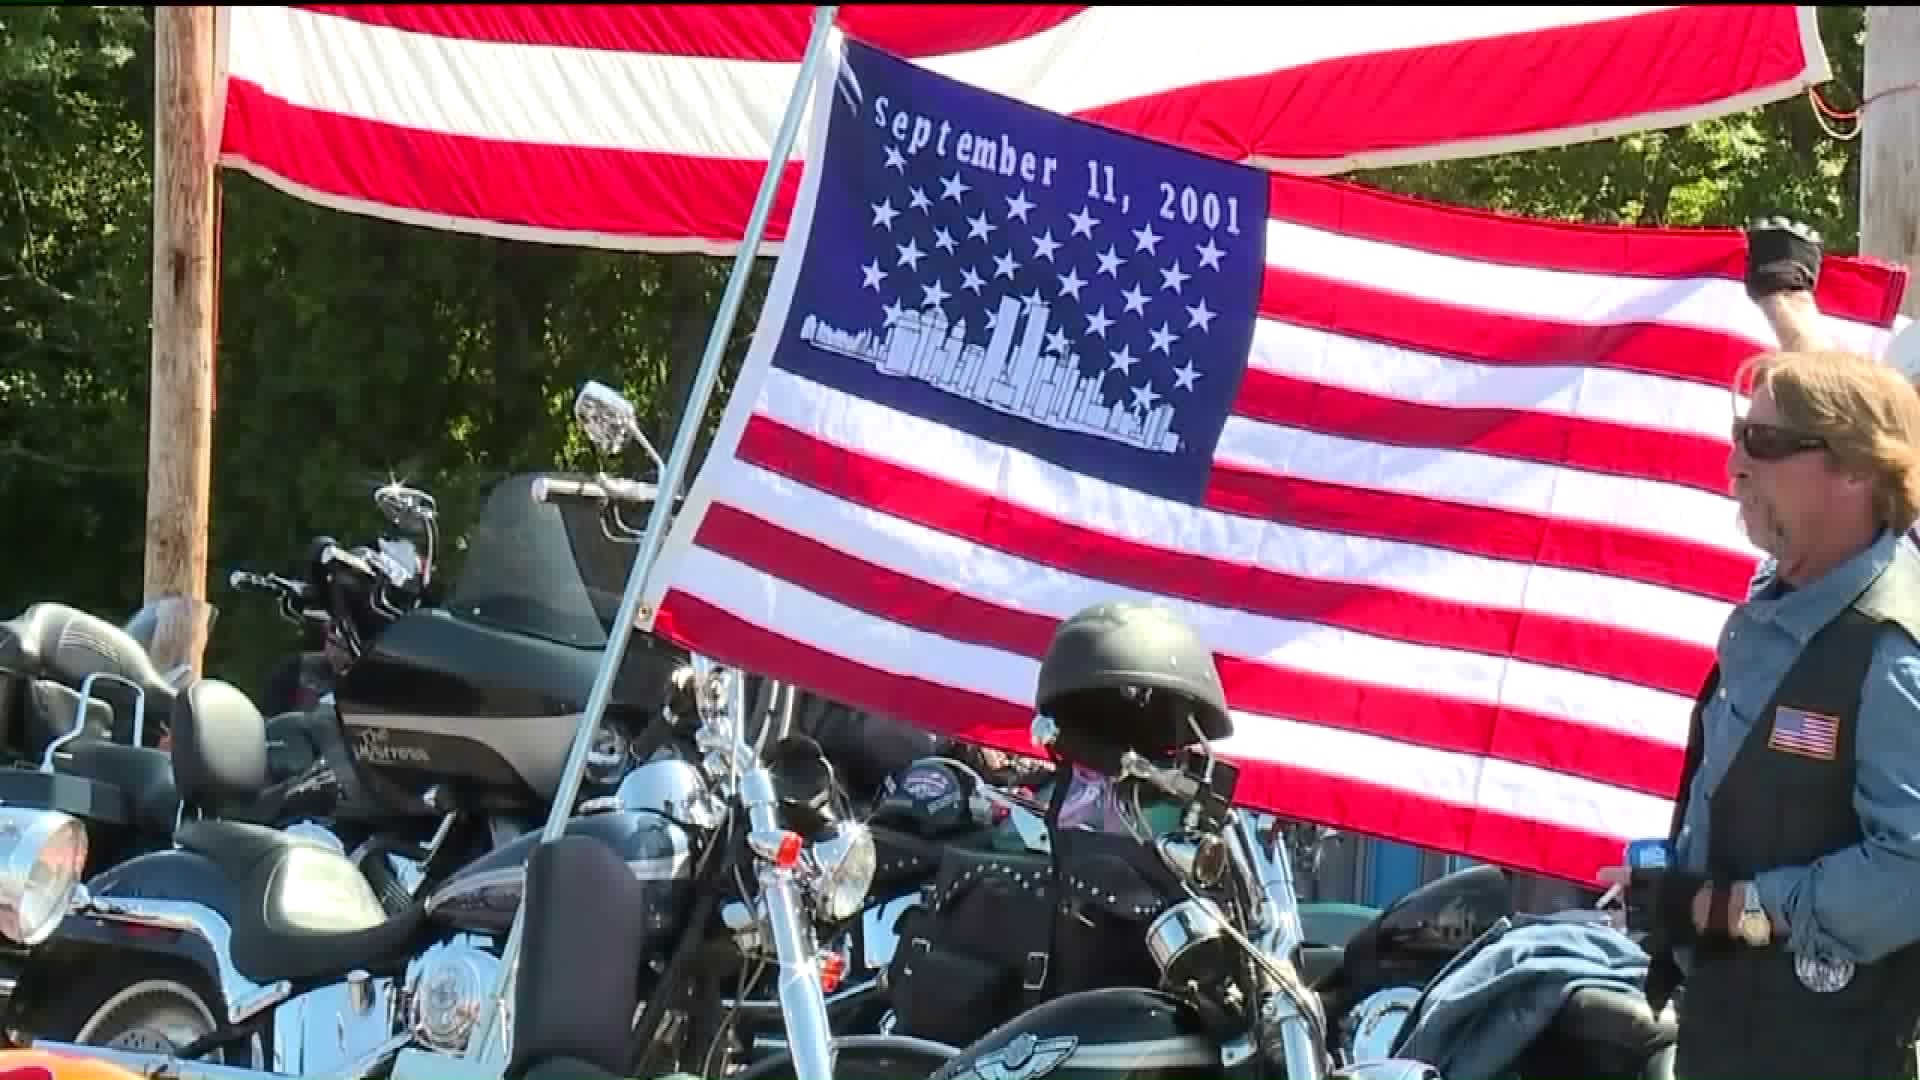 Annual Motorcycle Ride to Commemorate 9/11